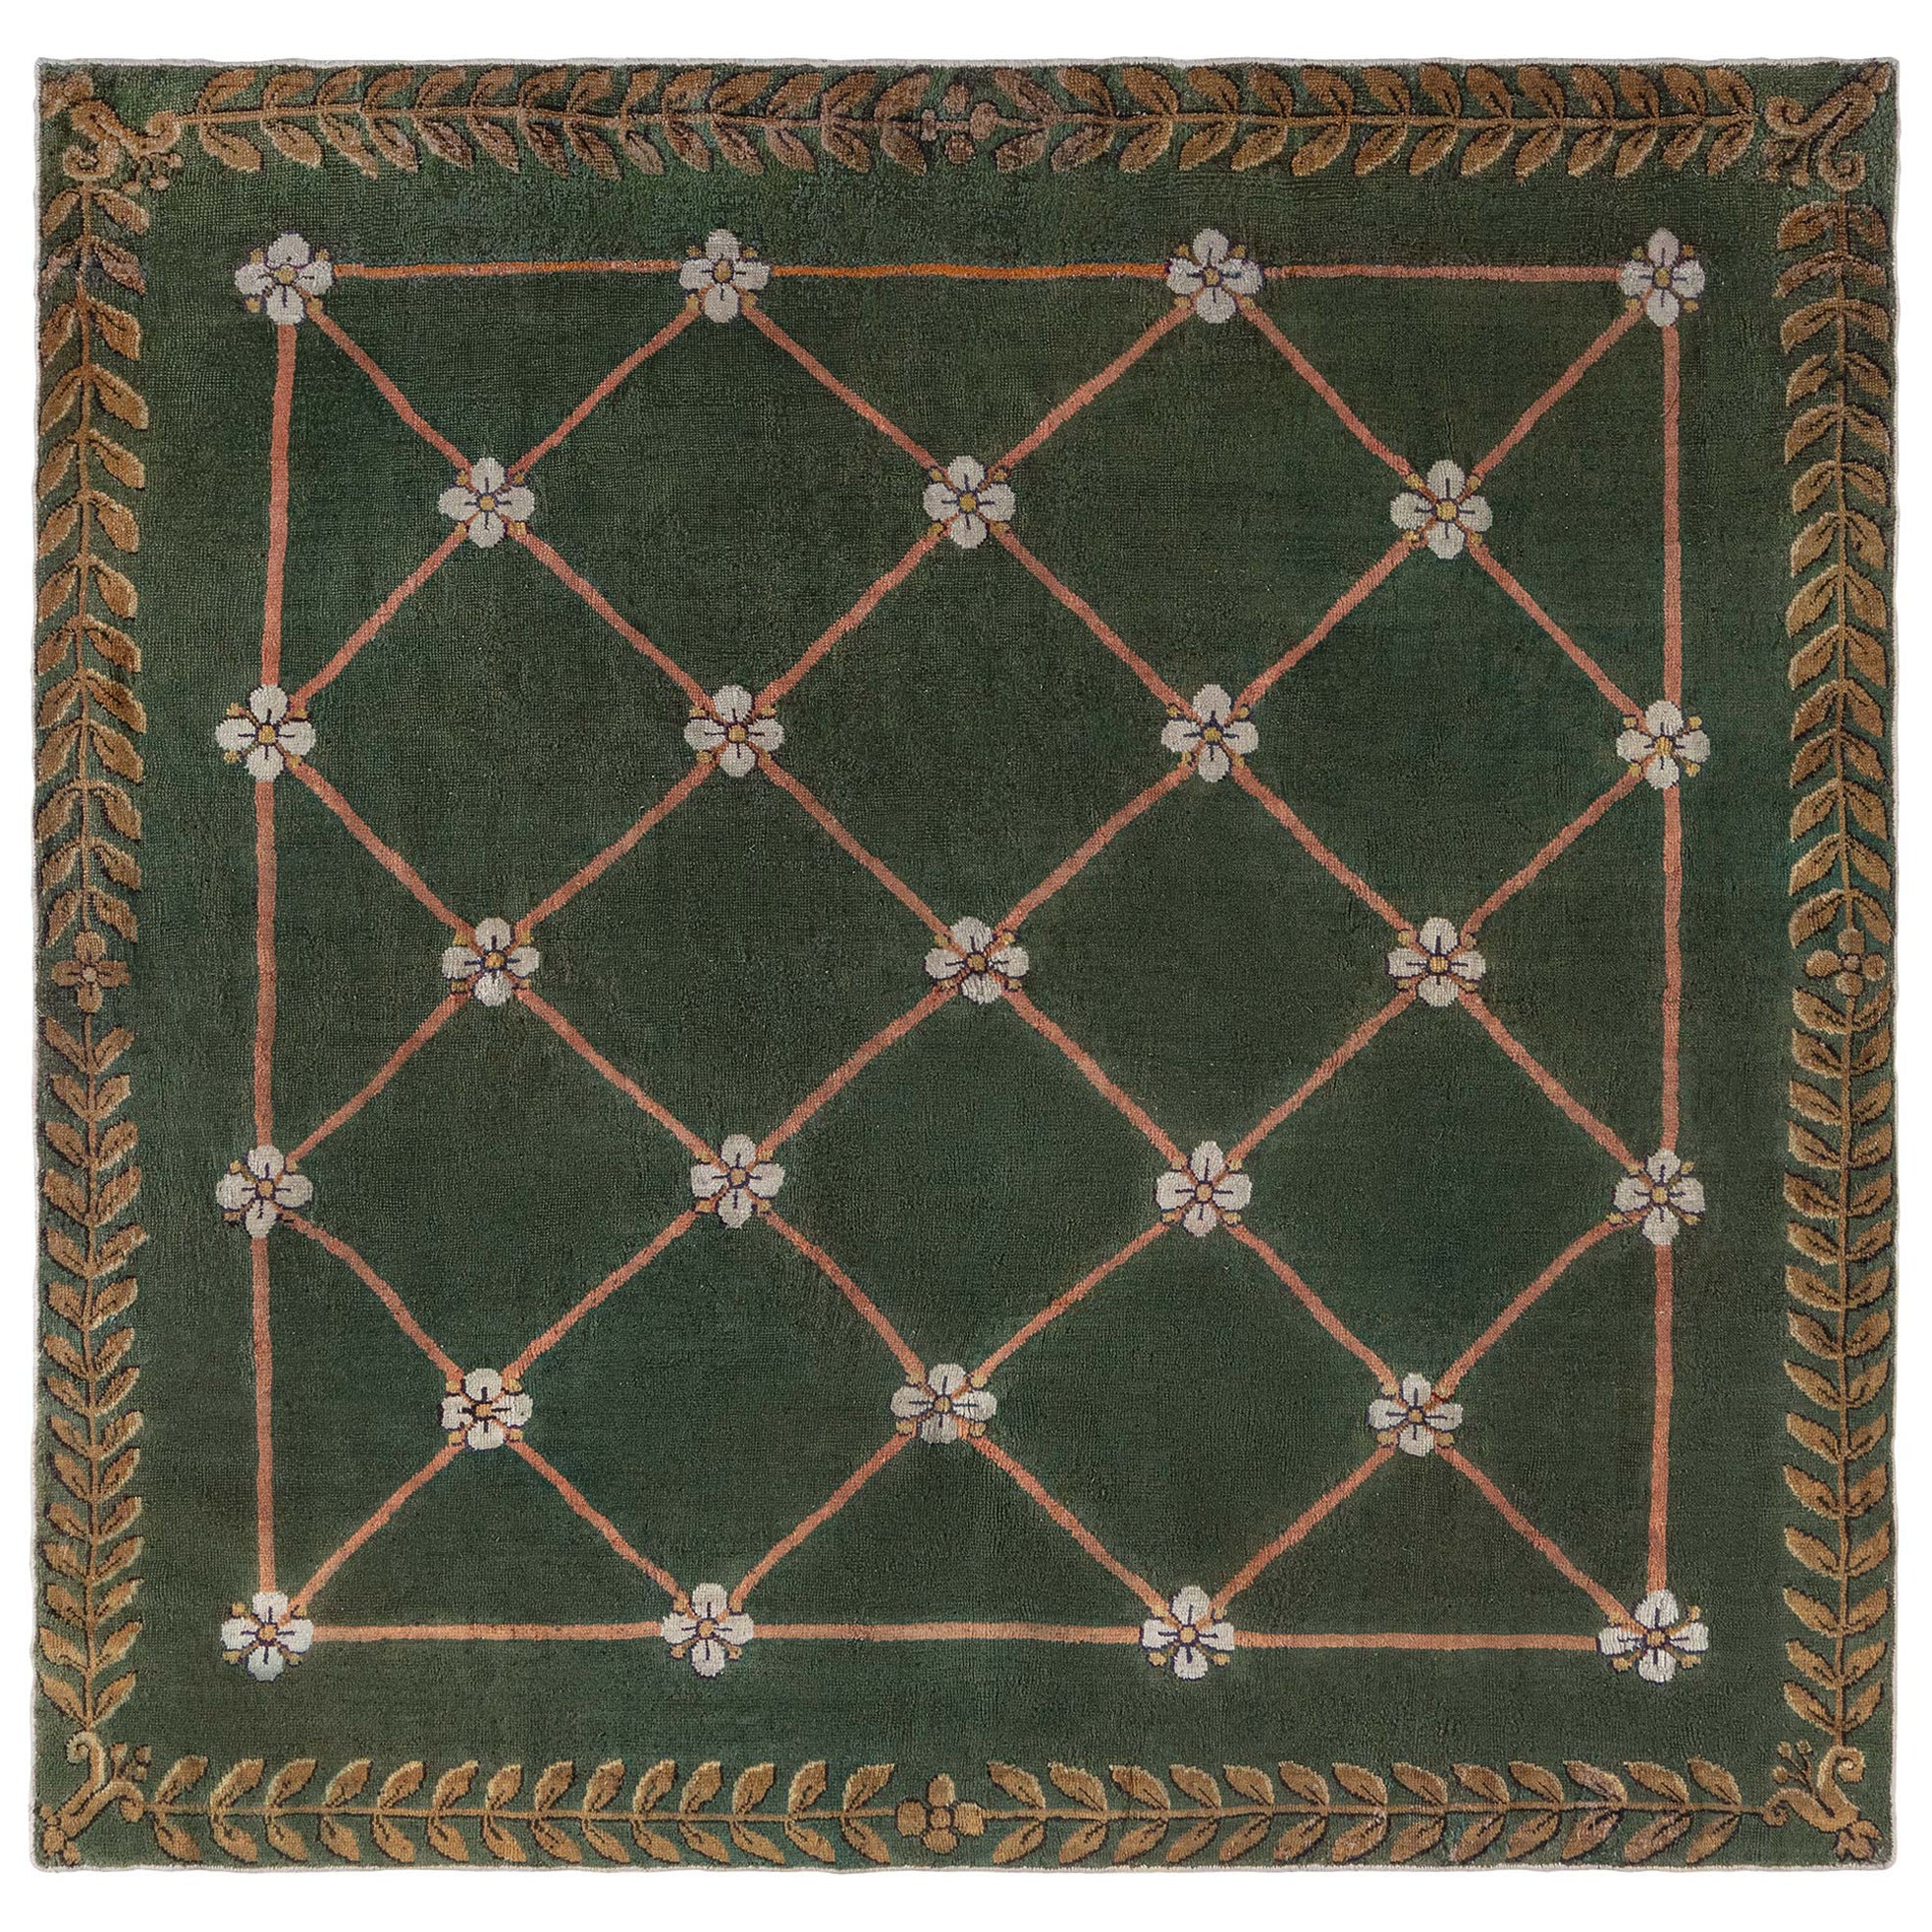 Authentic 19th Century Savonnerie Green Wool Carpet For Sale